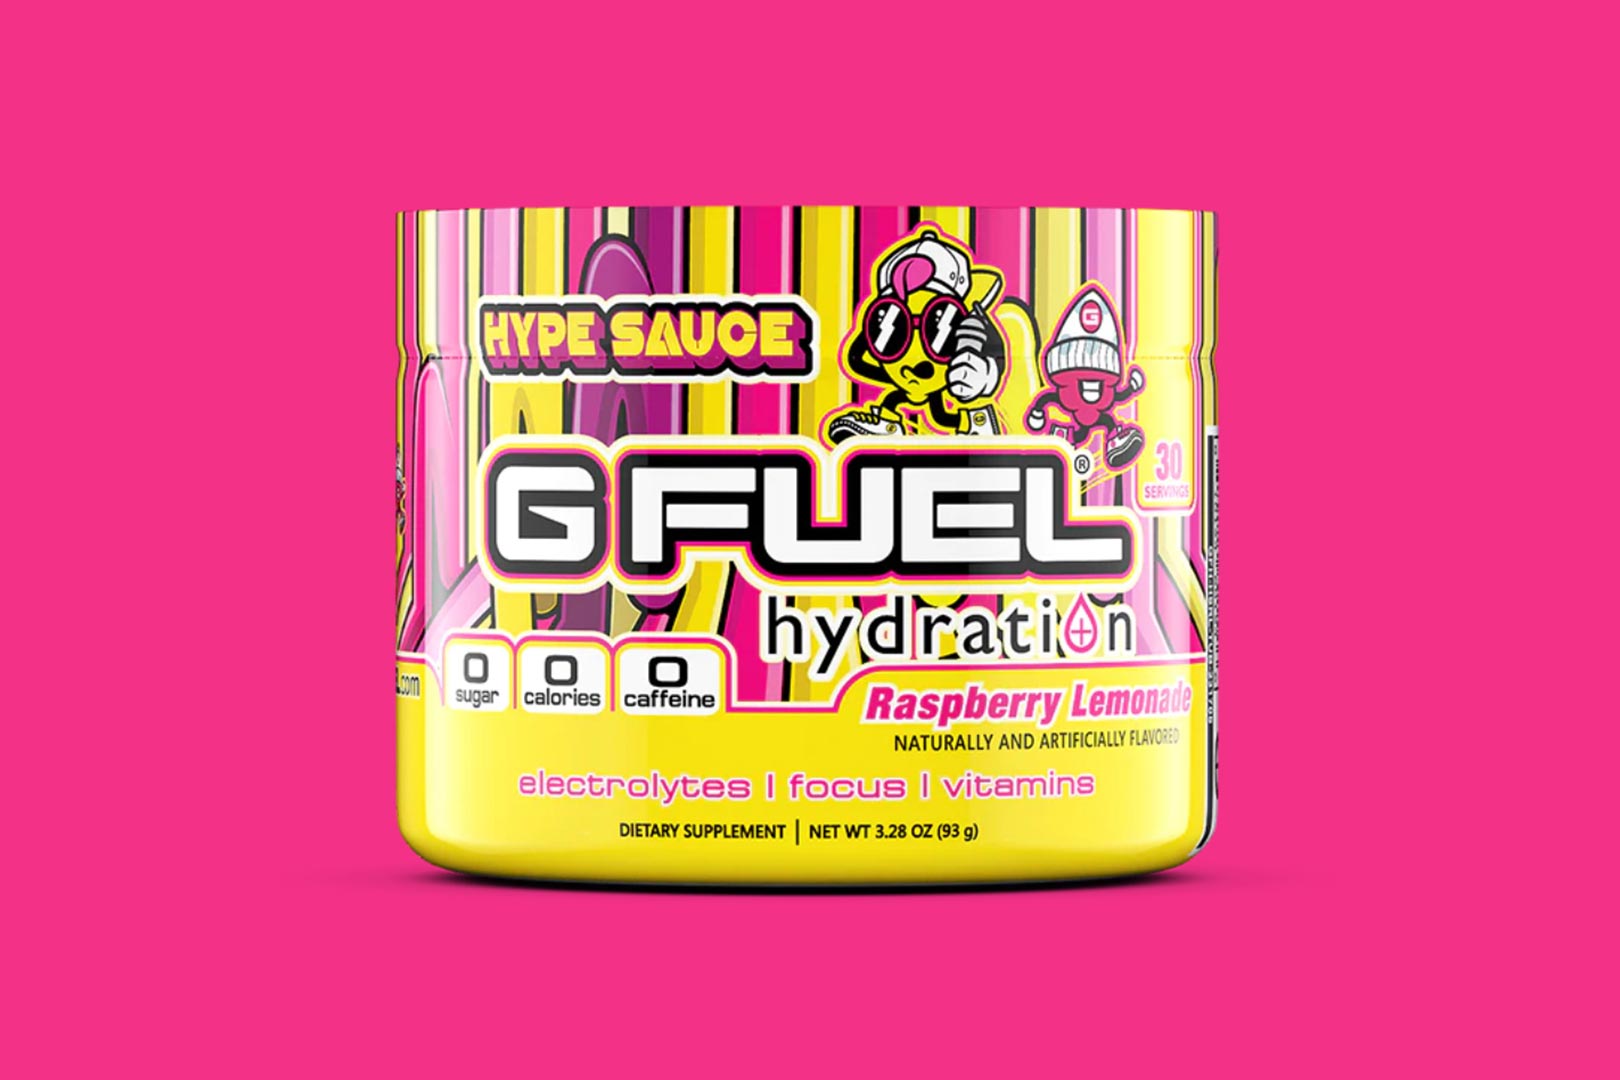 Hype Sauce G Fuel Hydration